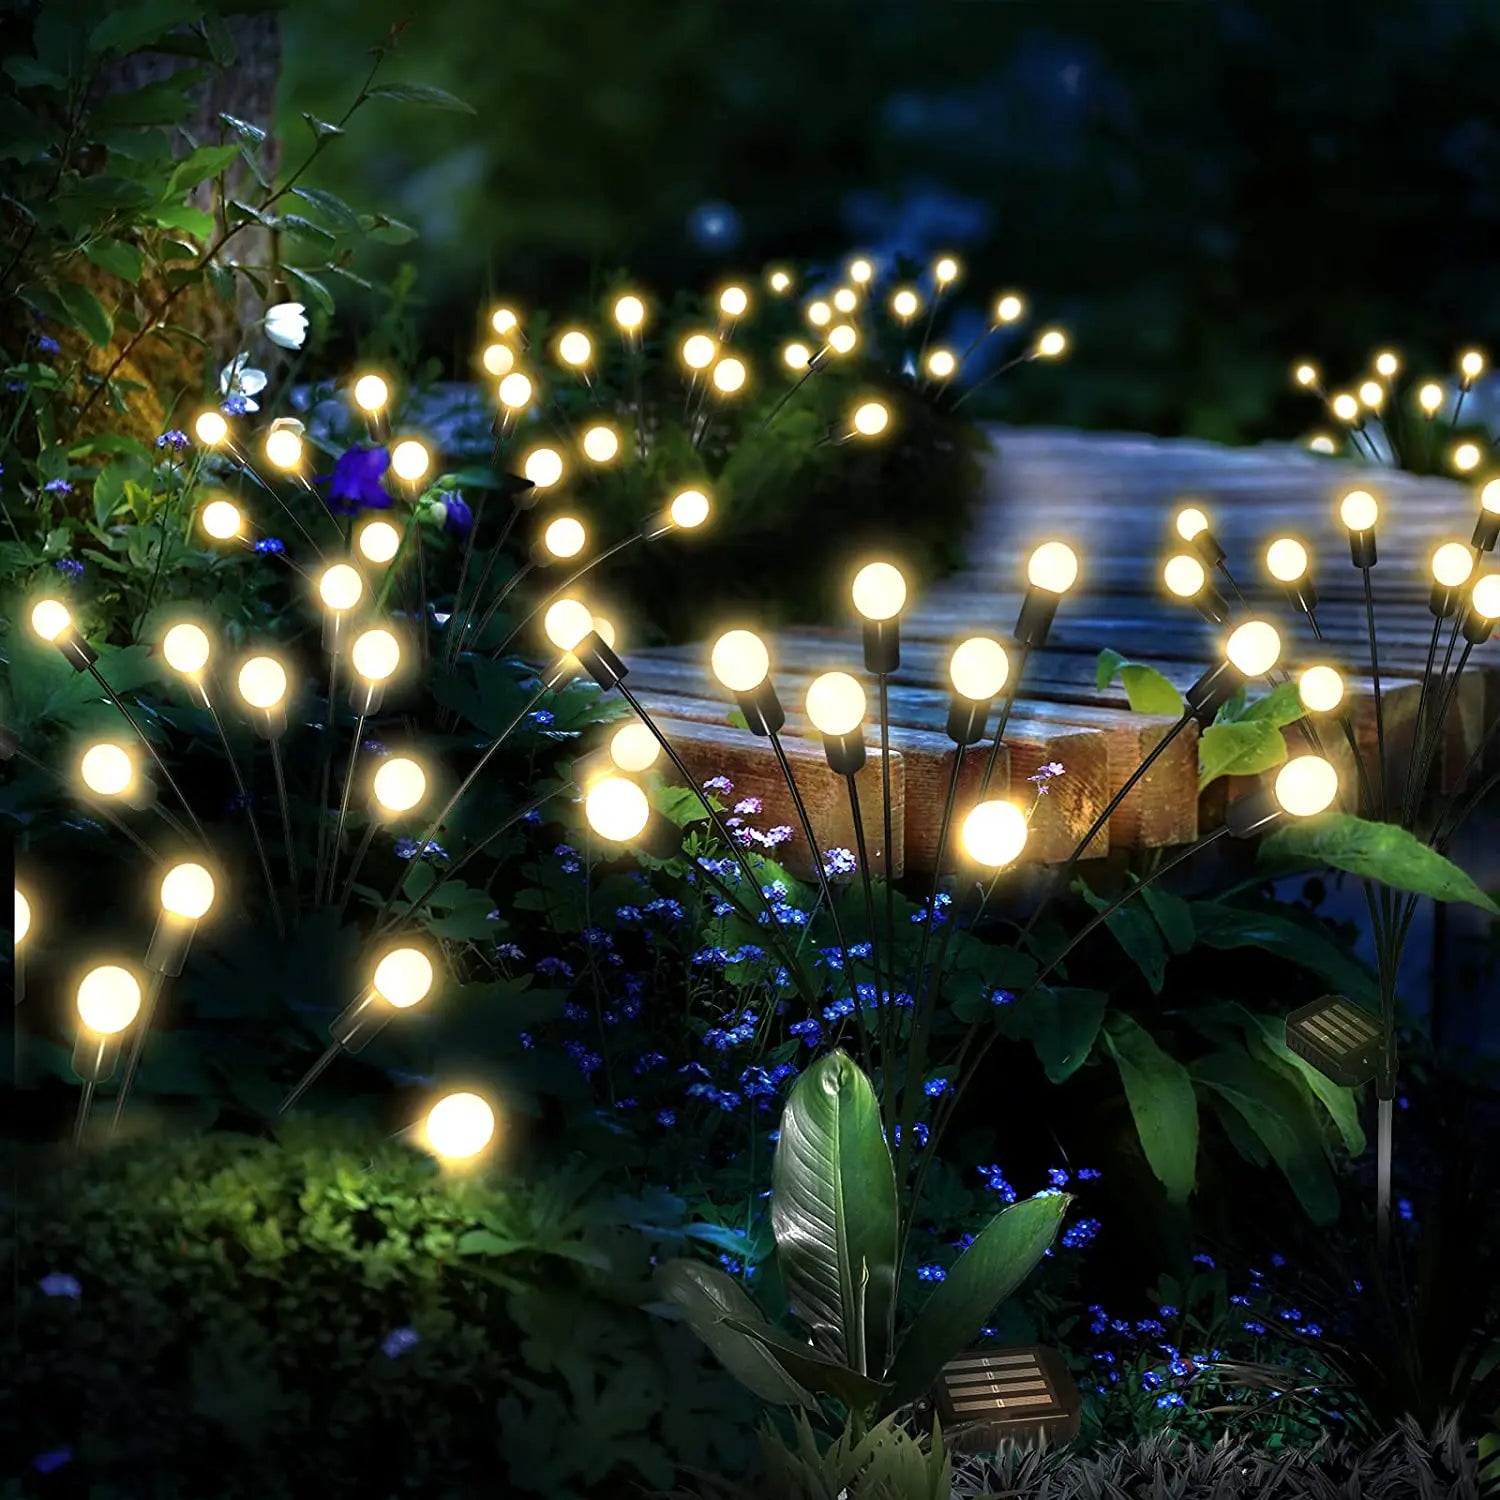 8Pack Solar Firefly Light, Solar-powered LED lights with waterproof design and durable materials for outdoor use.